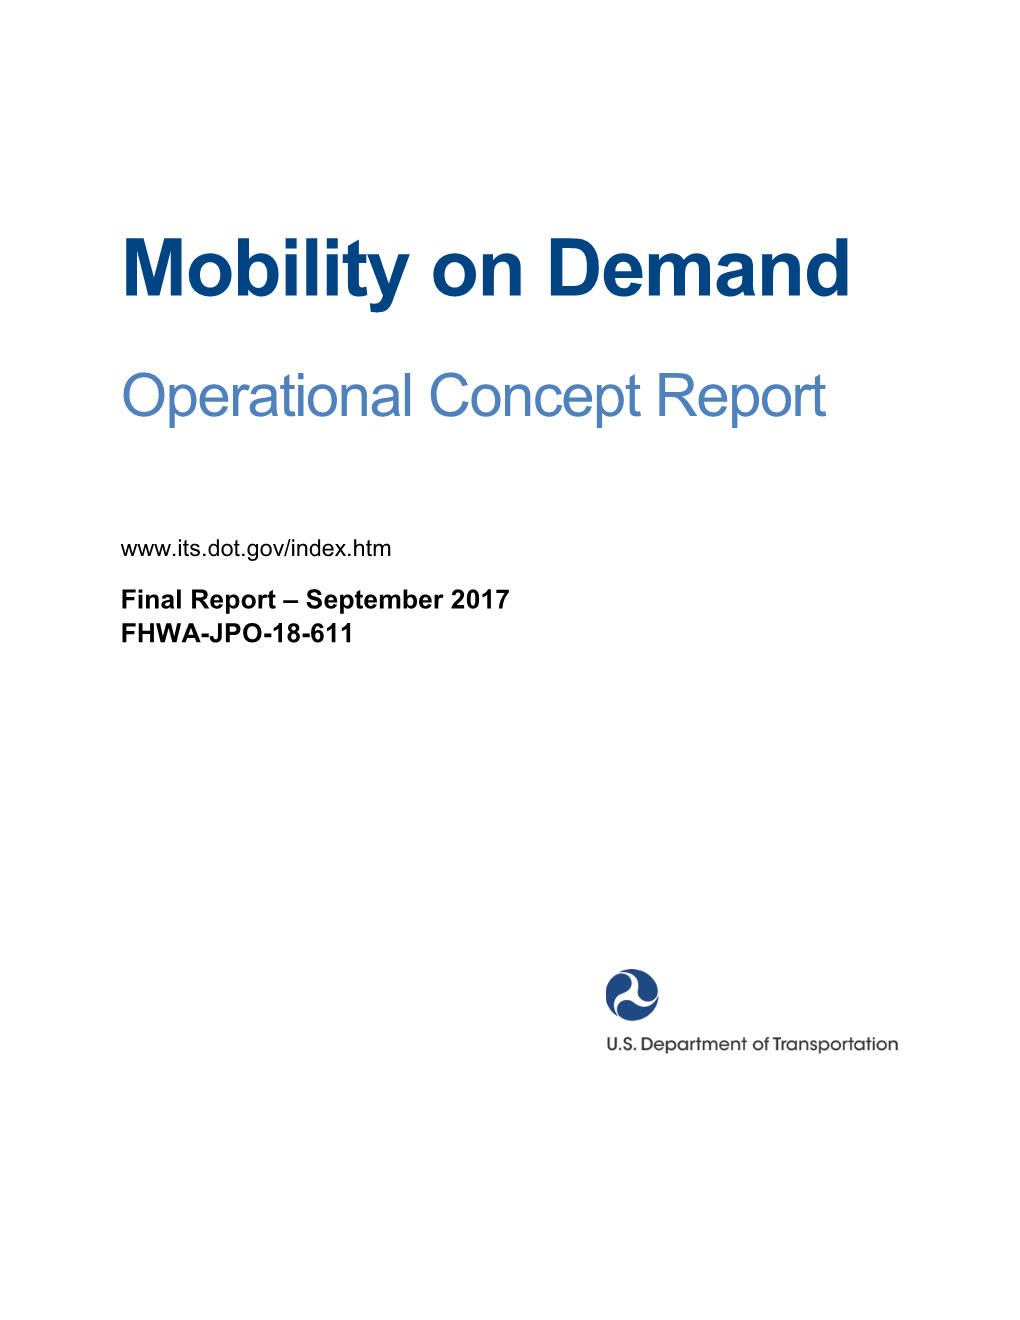 Mobility on Demand Operational Concept Report